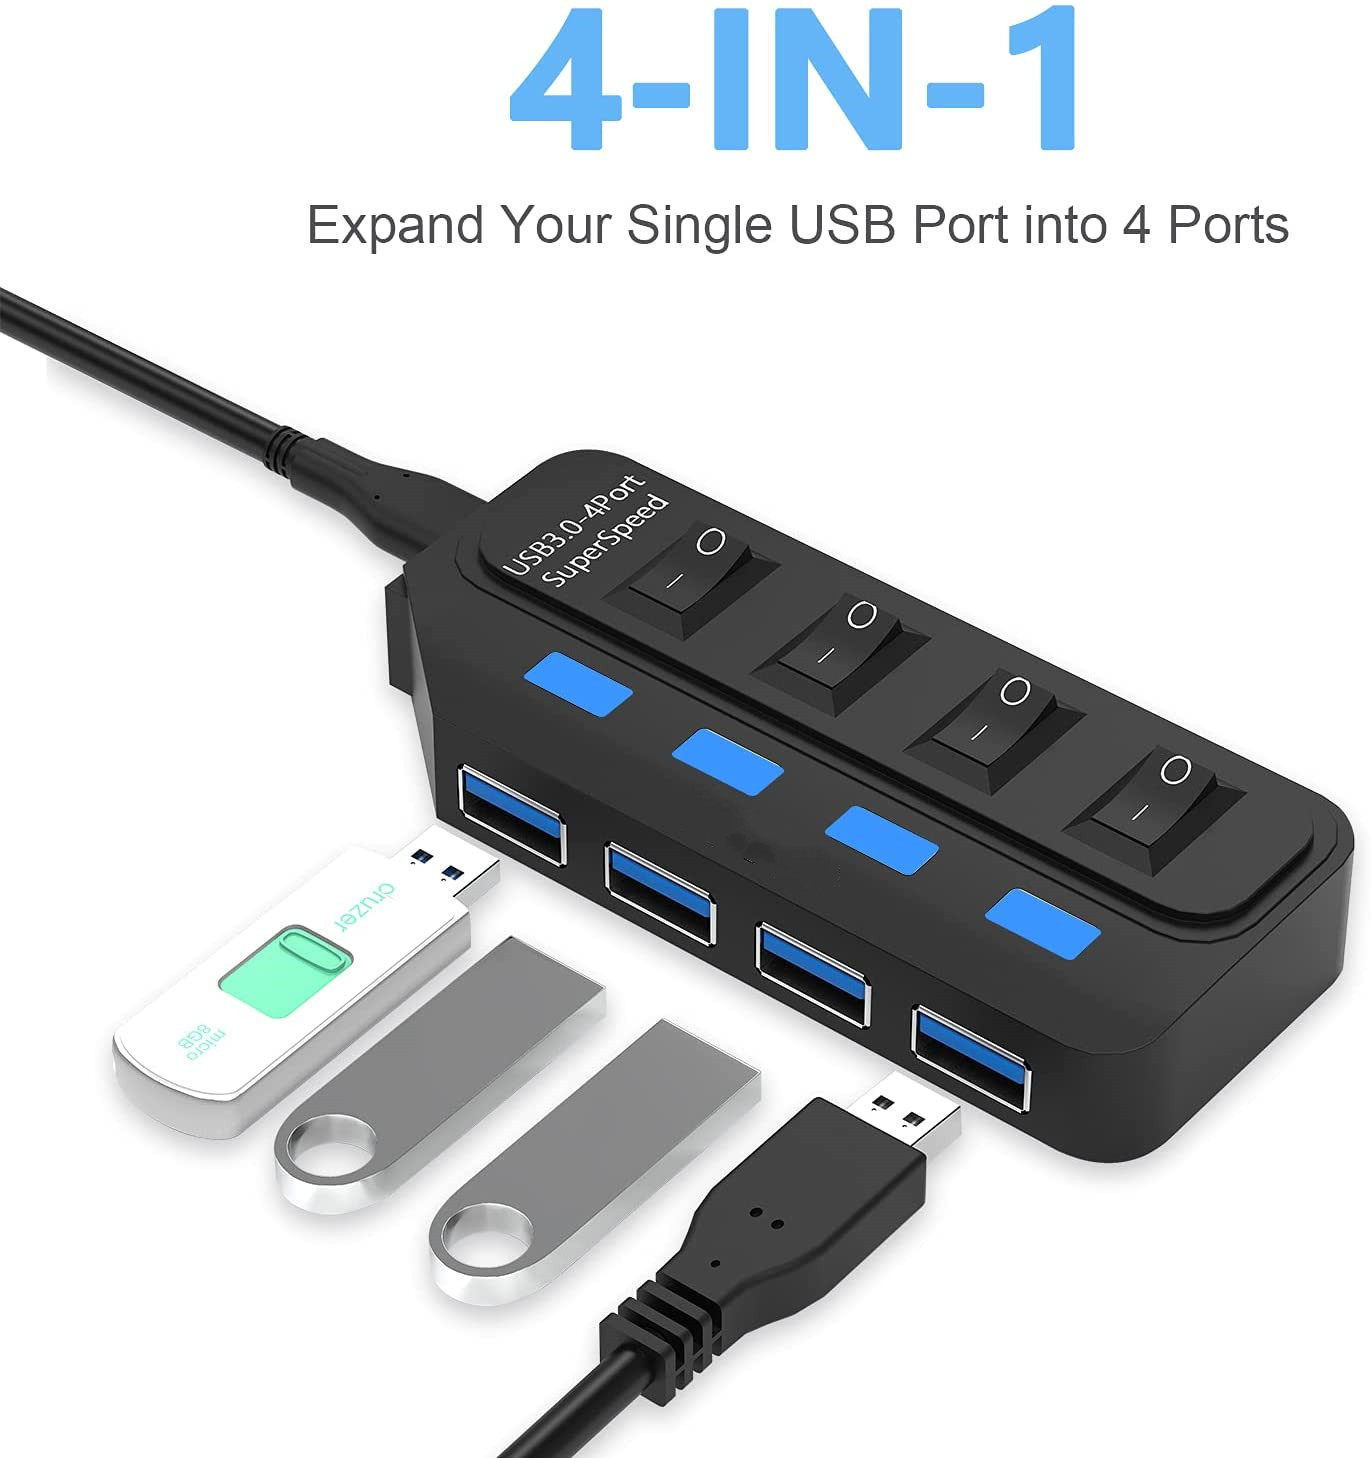 virtuel homoseksuel Descent Bailink 4 Port USB Hub, Portable SuperSpeed USB 3.0 Hub, Individual On/Off  Switches LED, USB Extension Multi-function USB Dock Hot Swapping Support  for Mac, PC, USB Flash Drives and Other Devices -